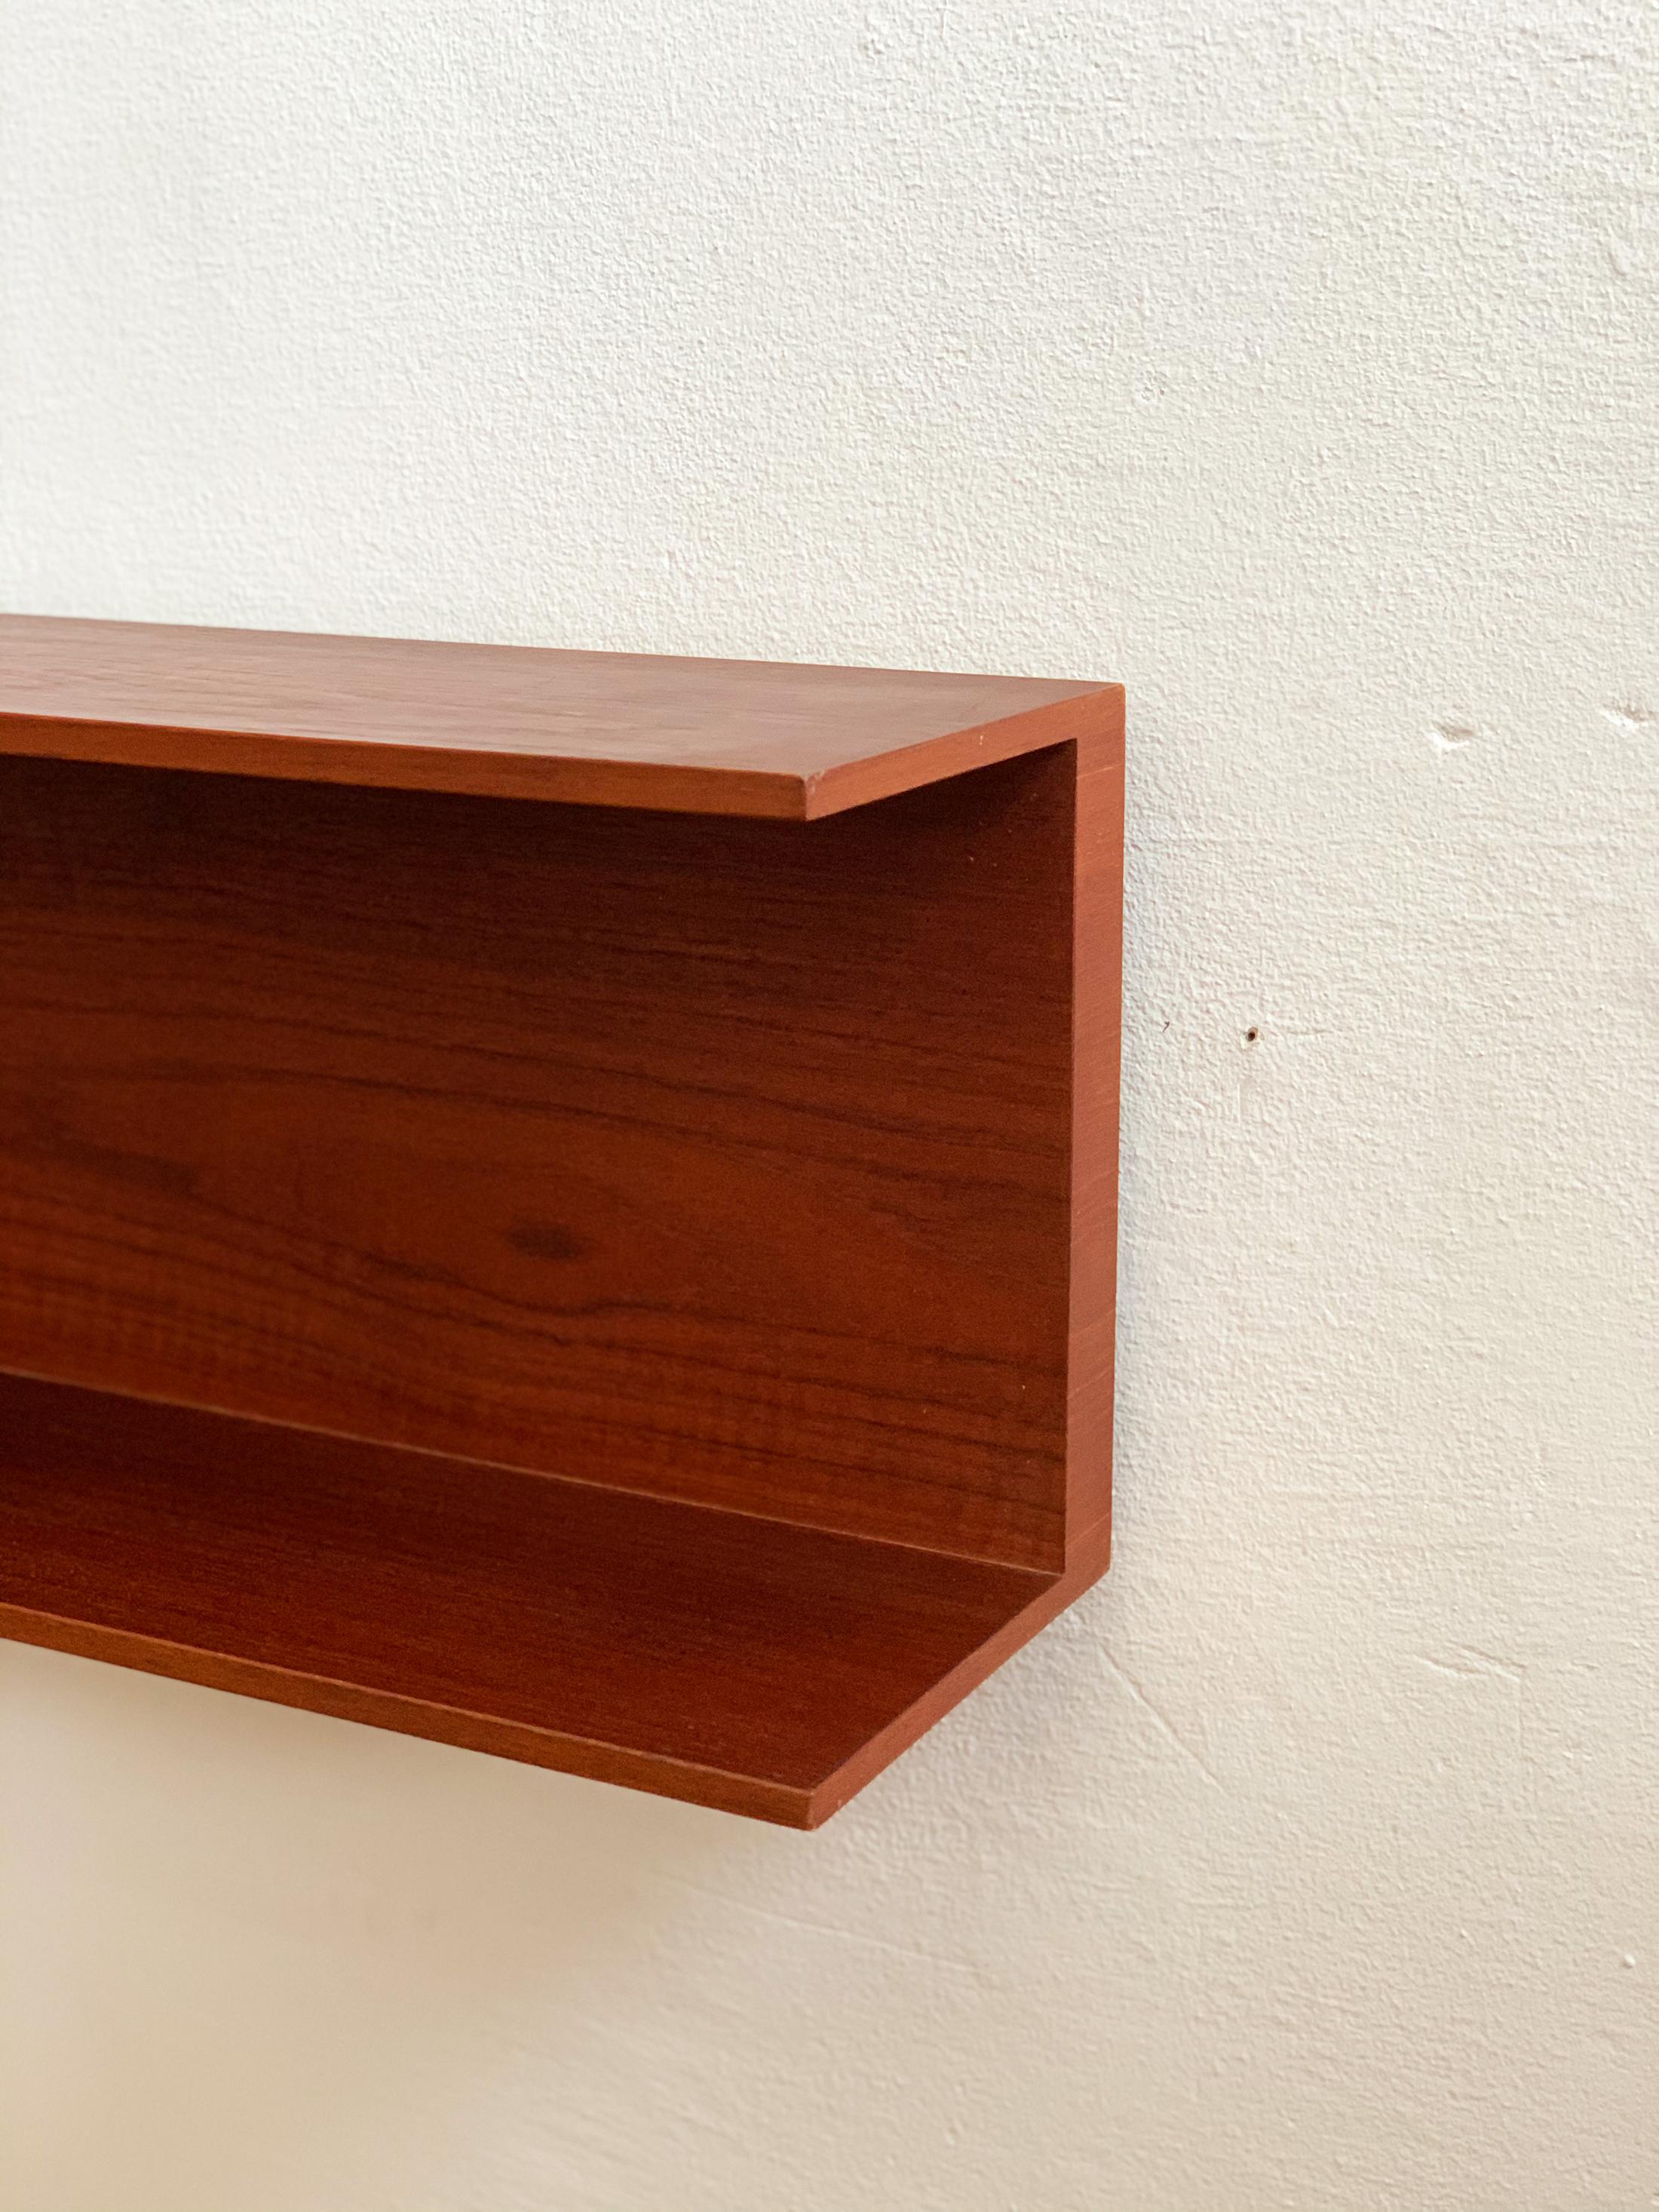 This elegant wooden wall-mounted shelf was designed by Walter Wirz and made by German premium manufacturer Wilhelm Renz. The U-shaped structure and minimalistic German design make a great highlight on every wall.
 
Good condition, only small